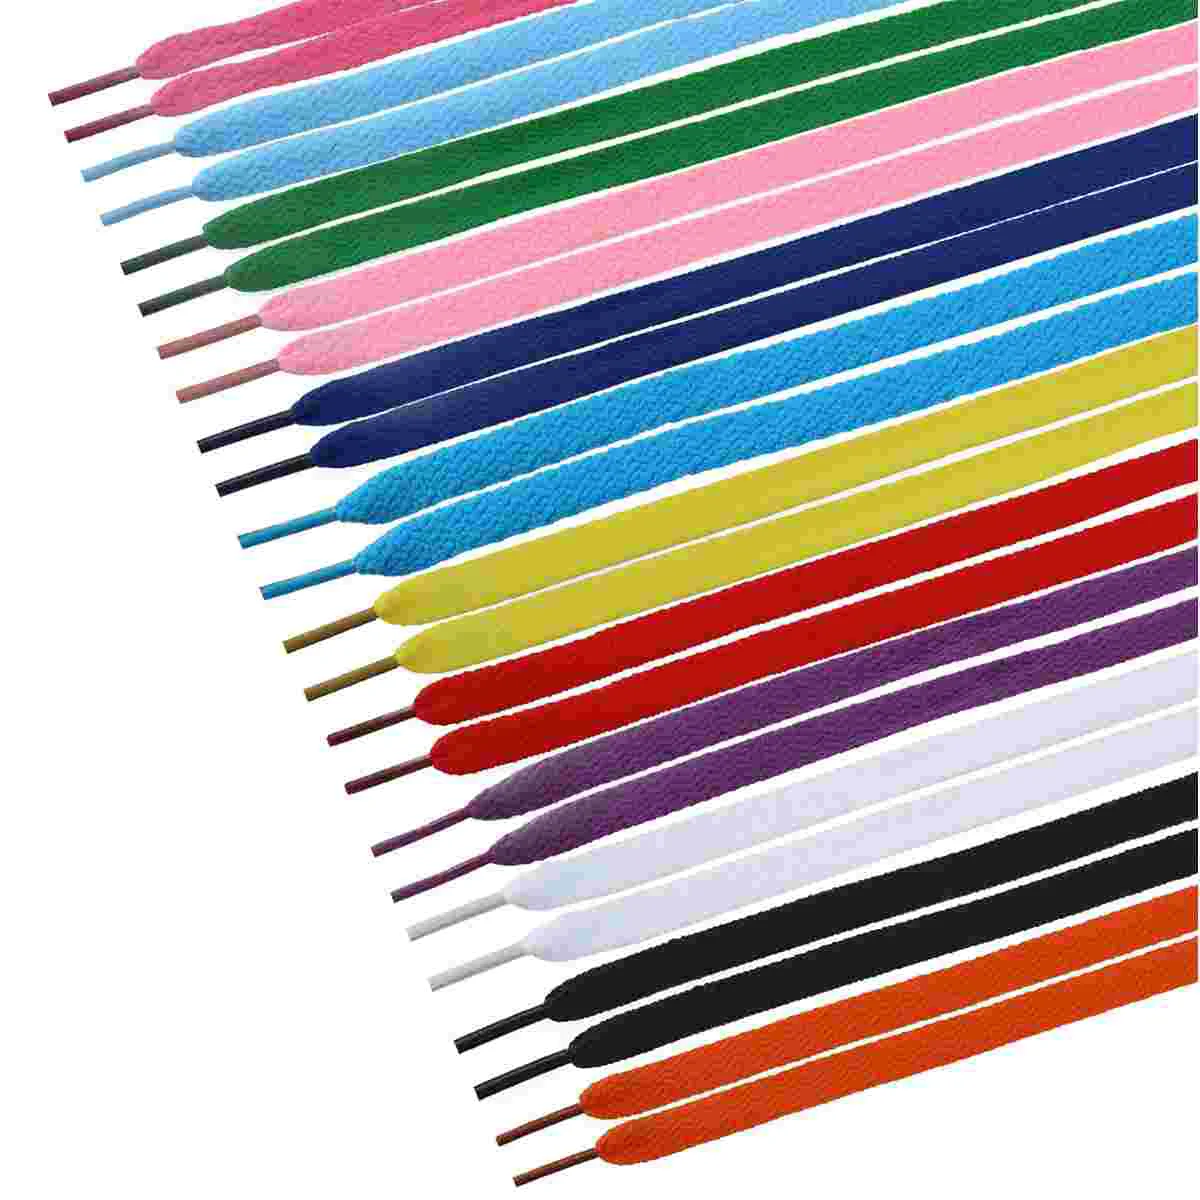 

12 Pairs Shoelaces Replacement Colored Flat Shoestrings Wide Shoe Laces for Sports Shoes Sneakers Shoes ( Mixed Colors )